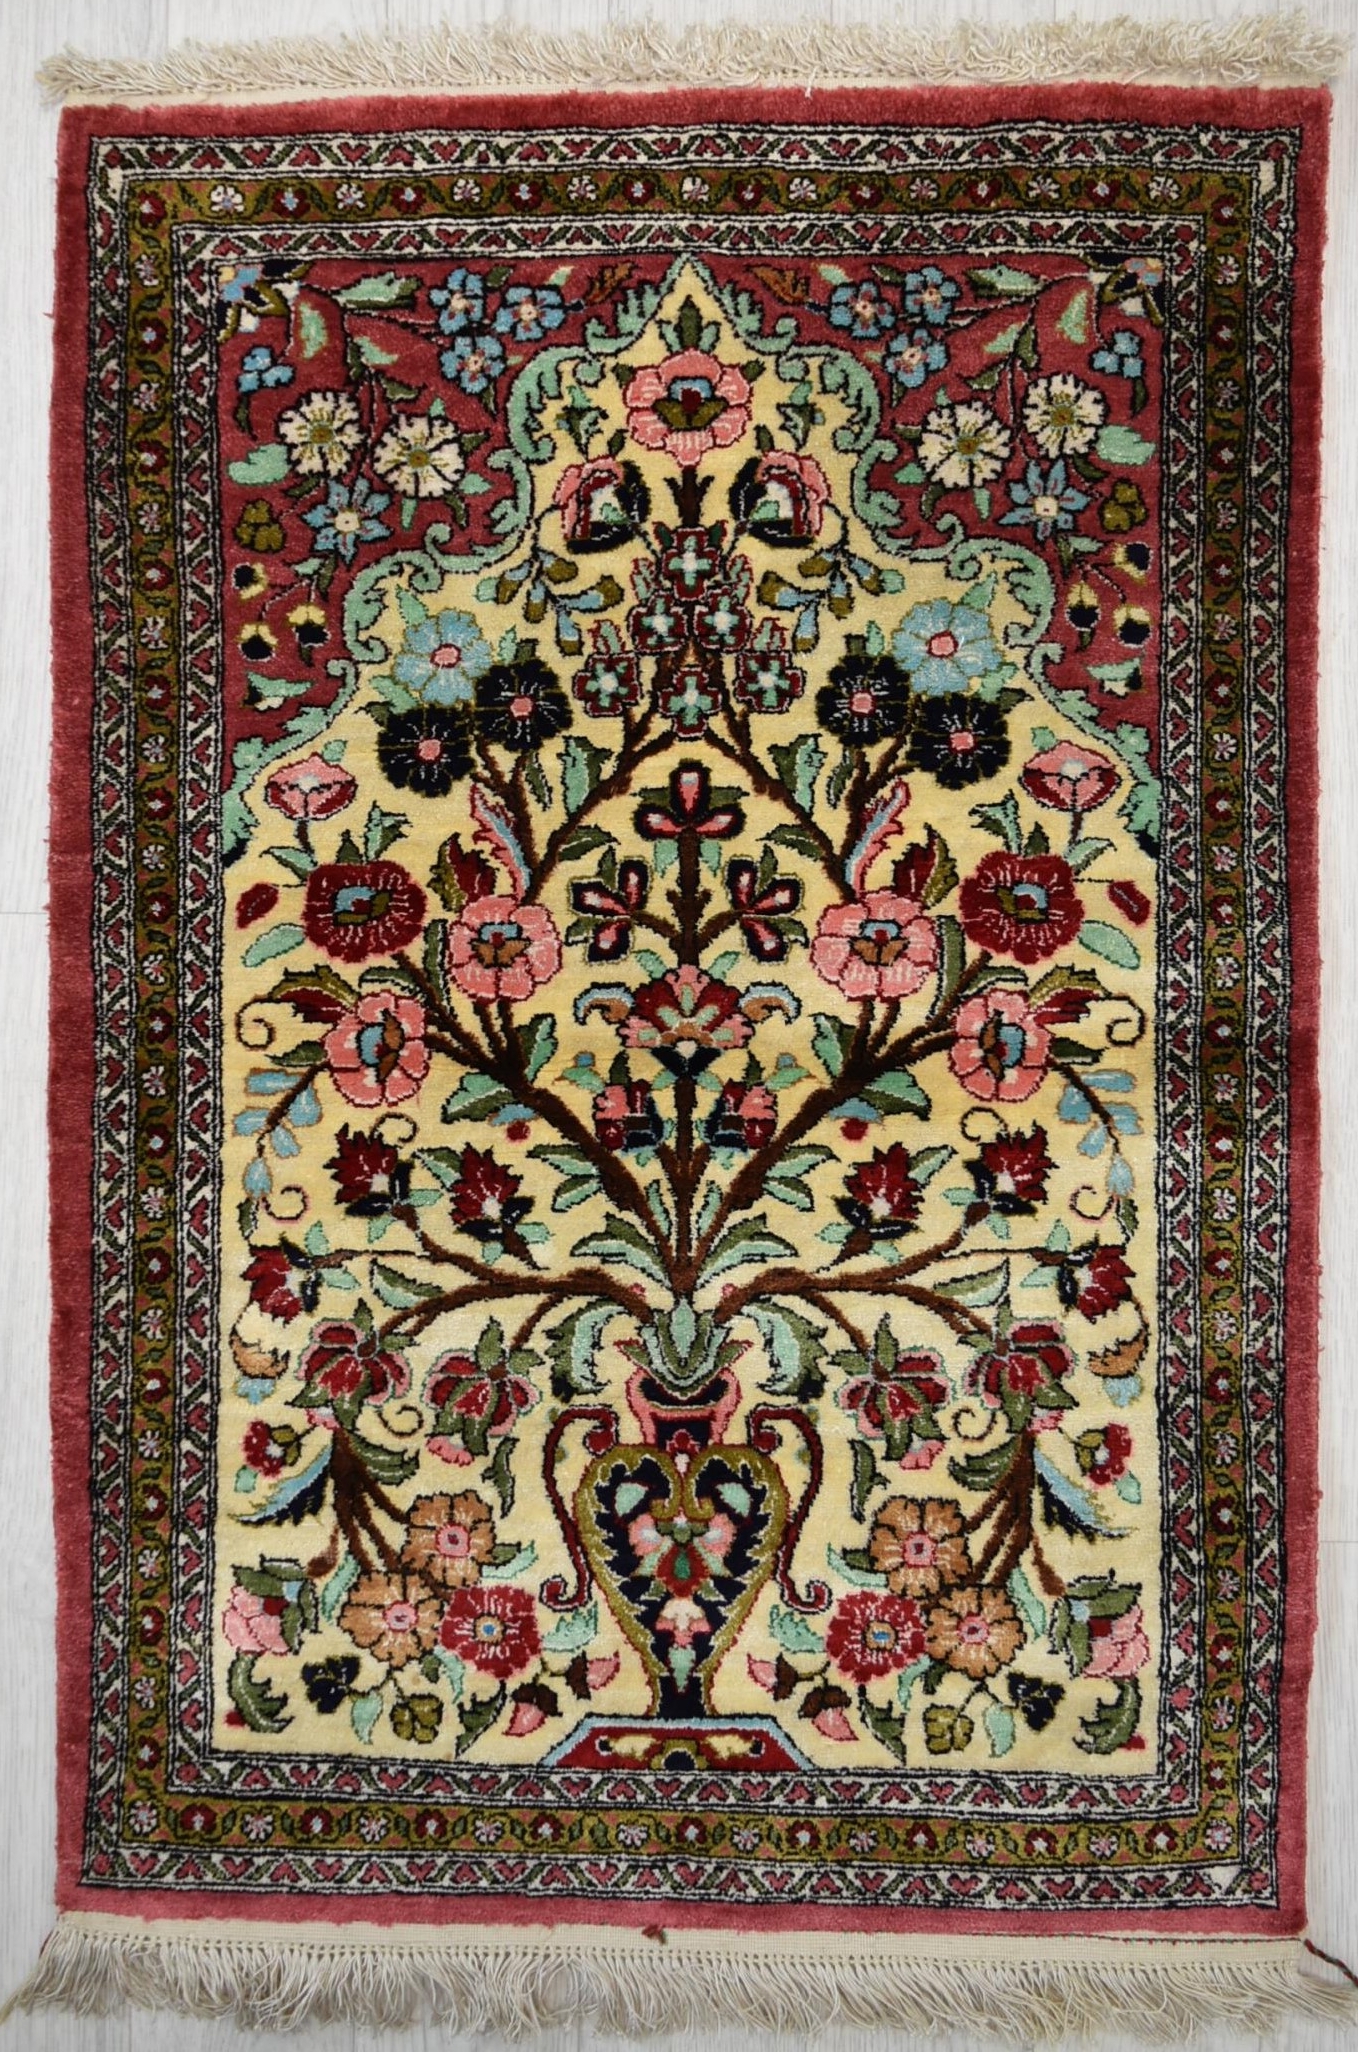 A Persian/Iranian silk qum rug, the central ivory field with tree of life within geometric and